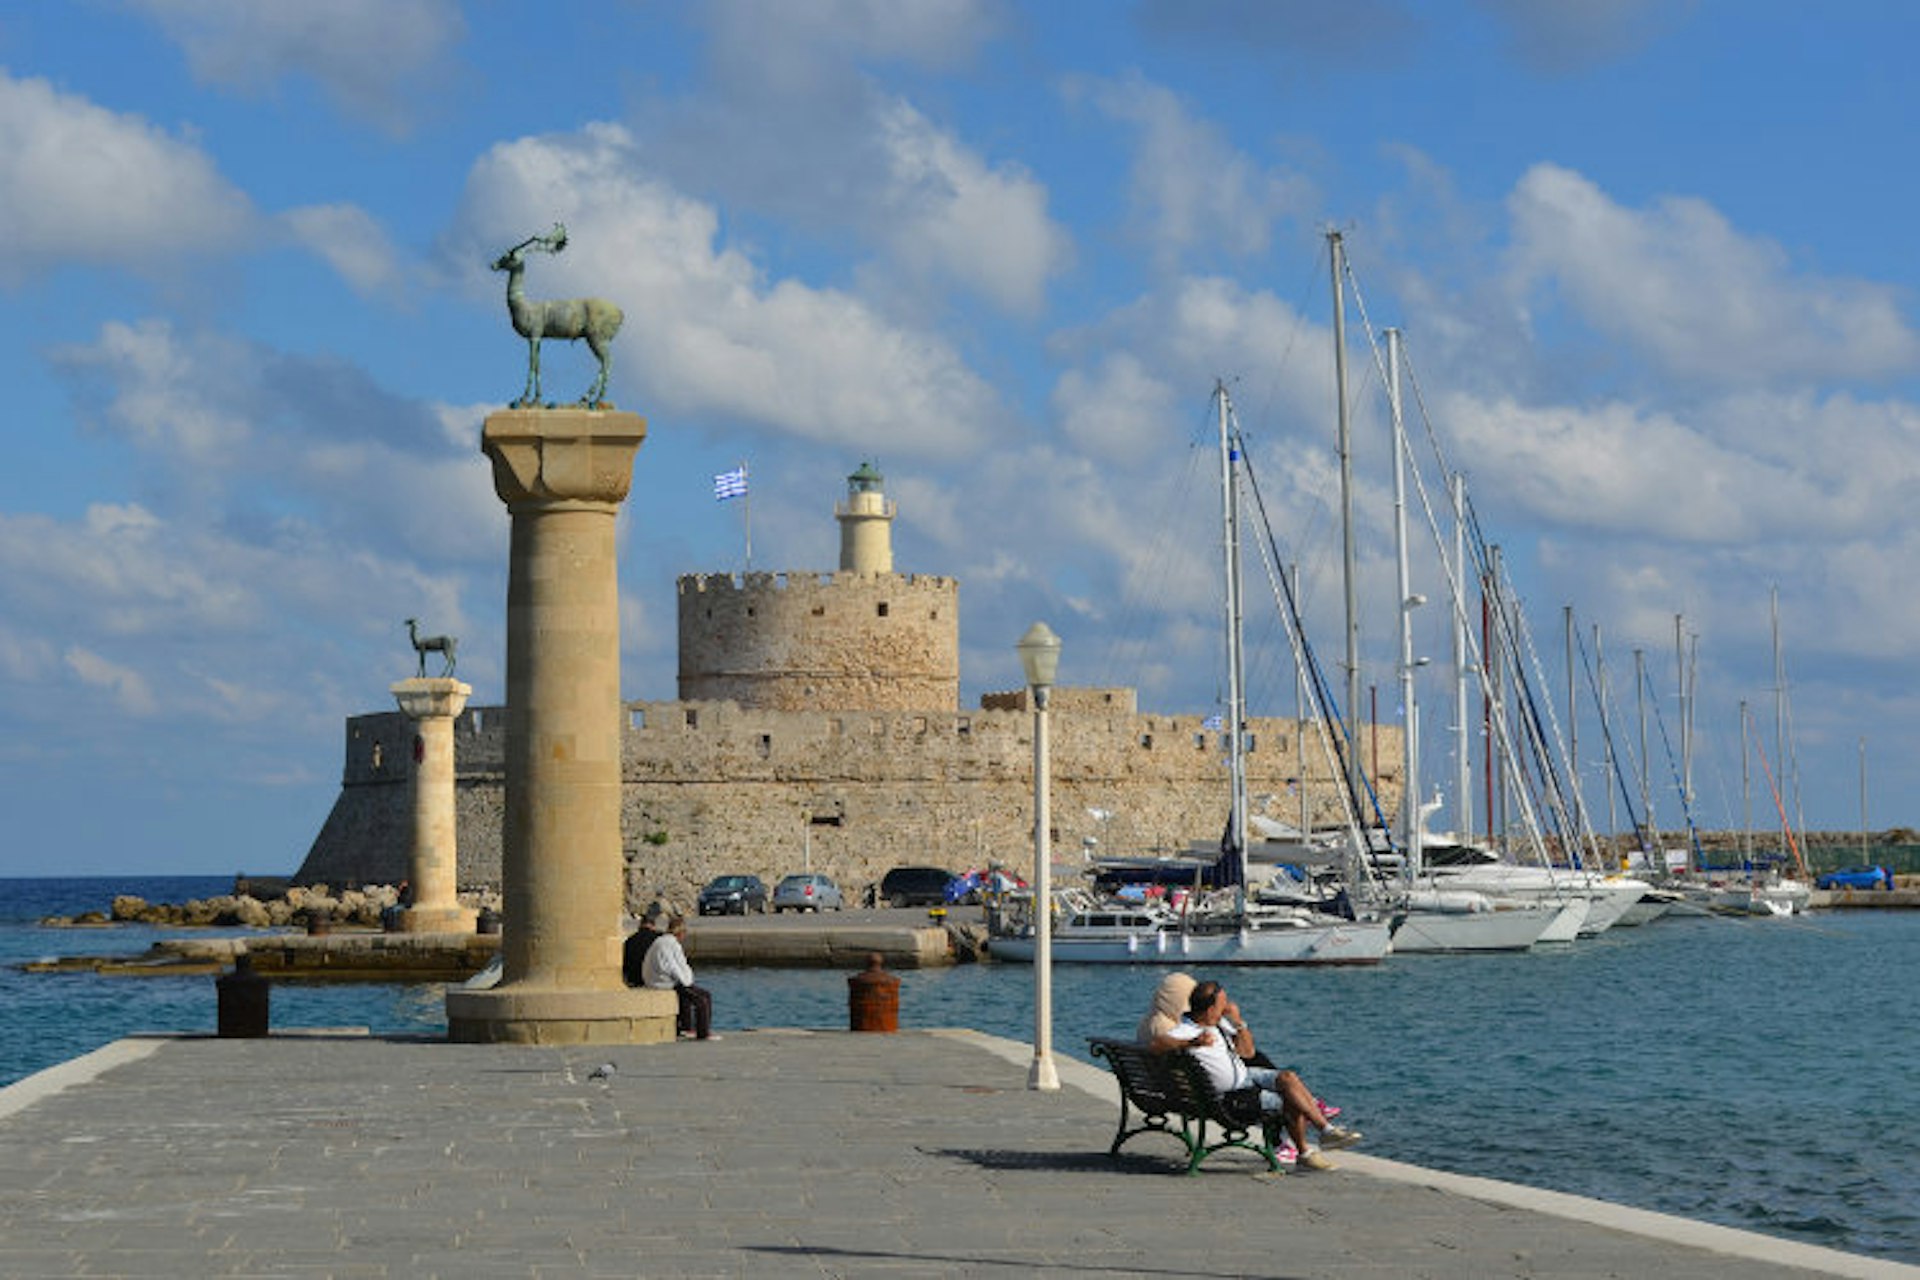 The entrance to the port at the Unesco-listed medieval Old Town of Rhodes. Image by Alexis Averbuck / Lonely Planet